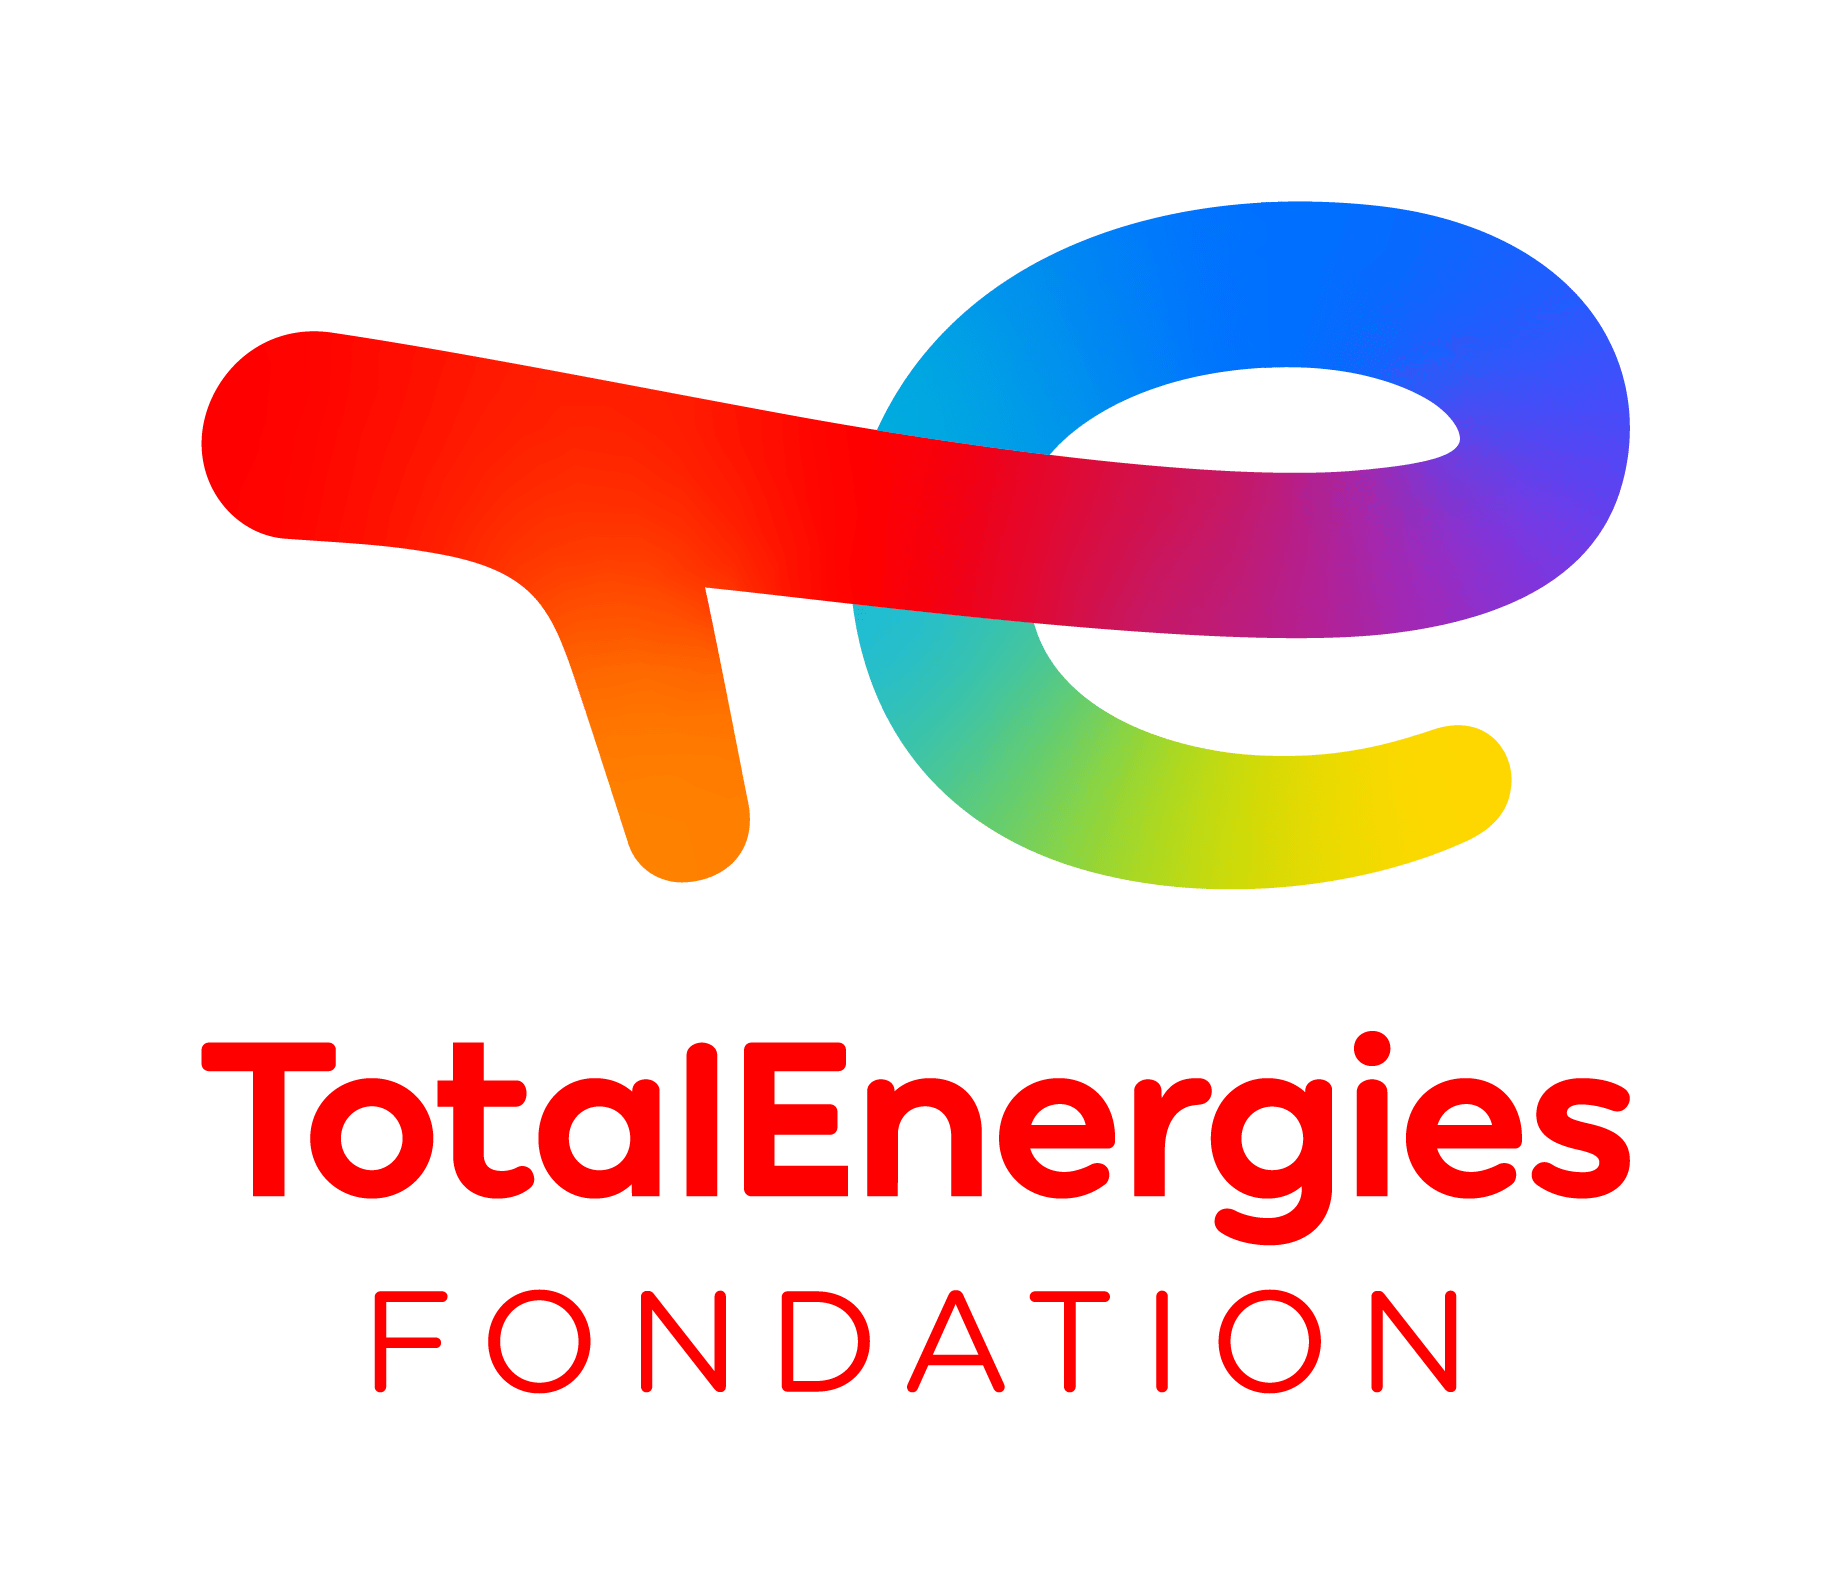 Total Foundation